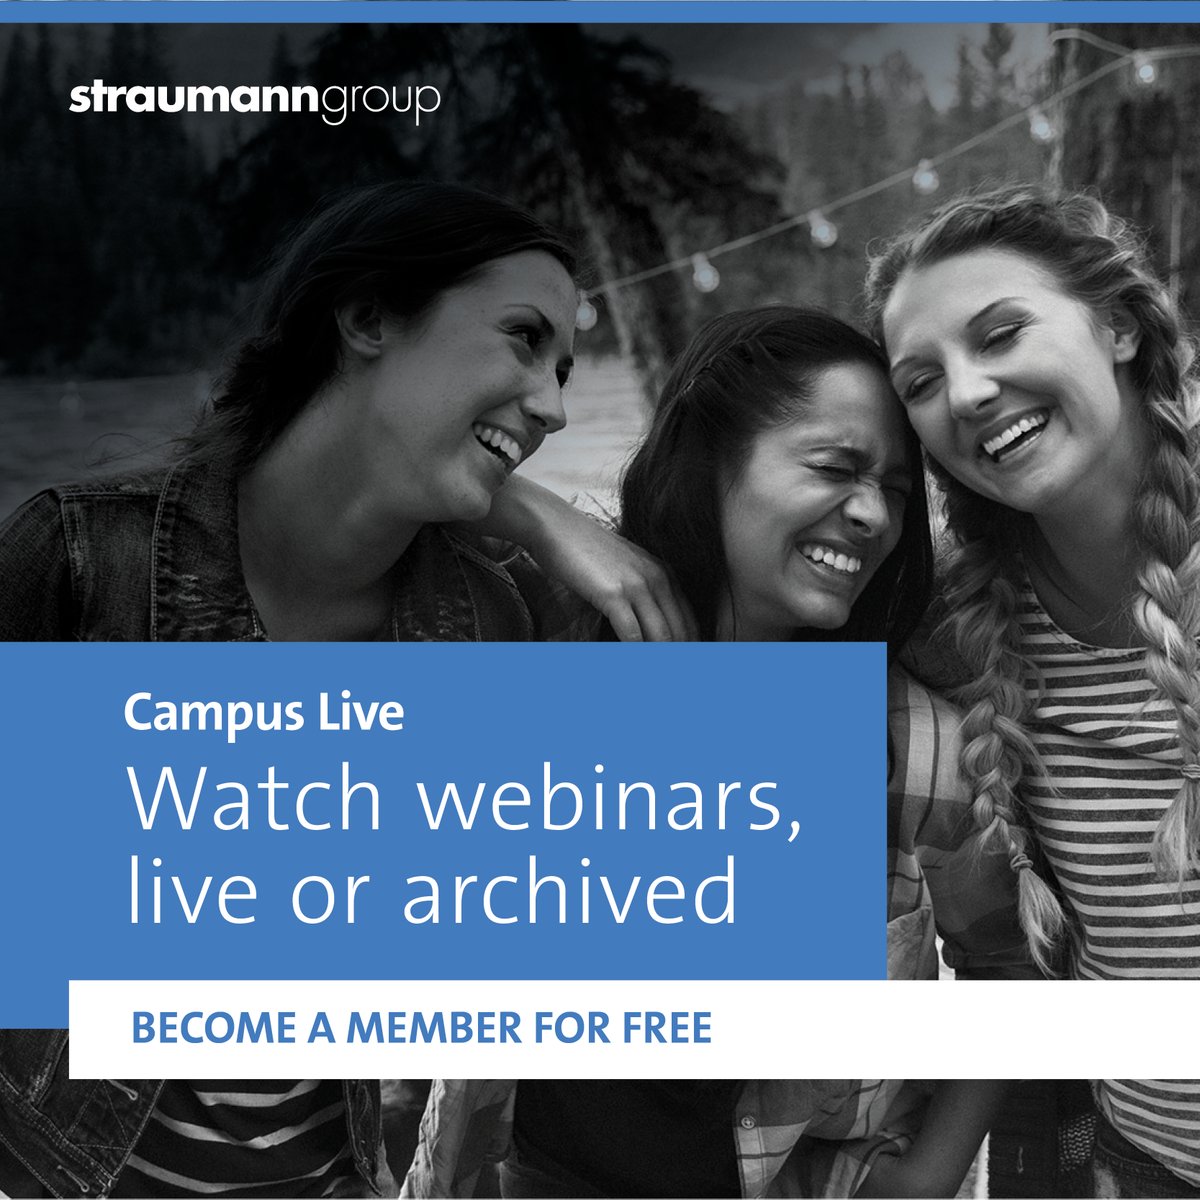 Did you miss one of our Webinars? No problem! You can now watch them all in our archives, on the campuslive platform here: bit.ly/3ckBJhC #TimeForEducation #straumann